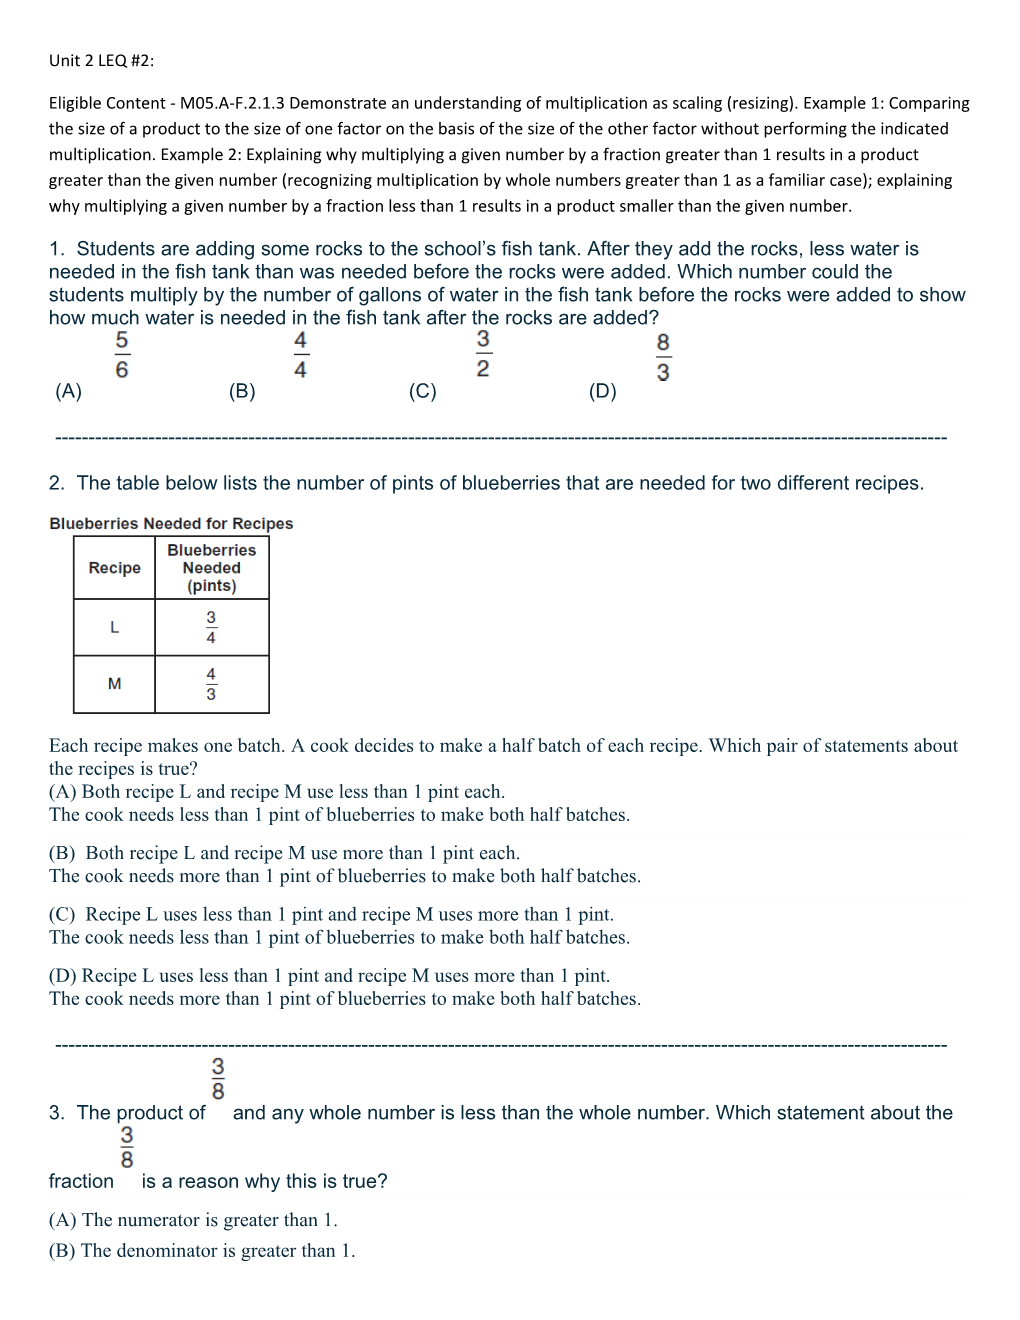 Eligible Content - M05.A-F.2.1.3 Demonstrate an Understanding of Multiplication As Scaling